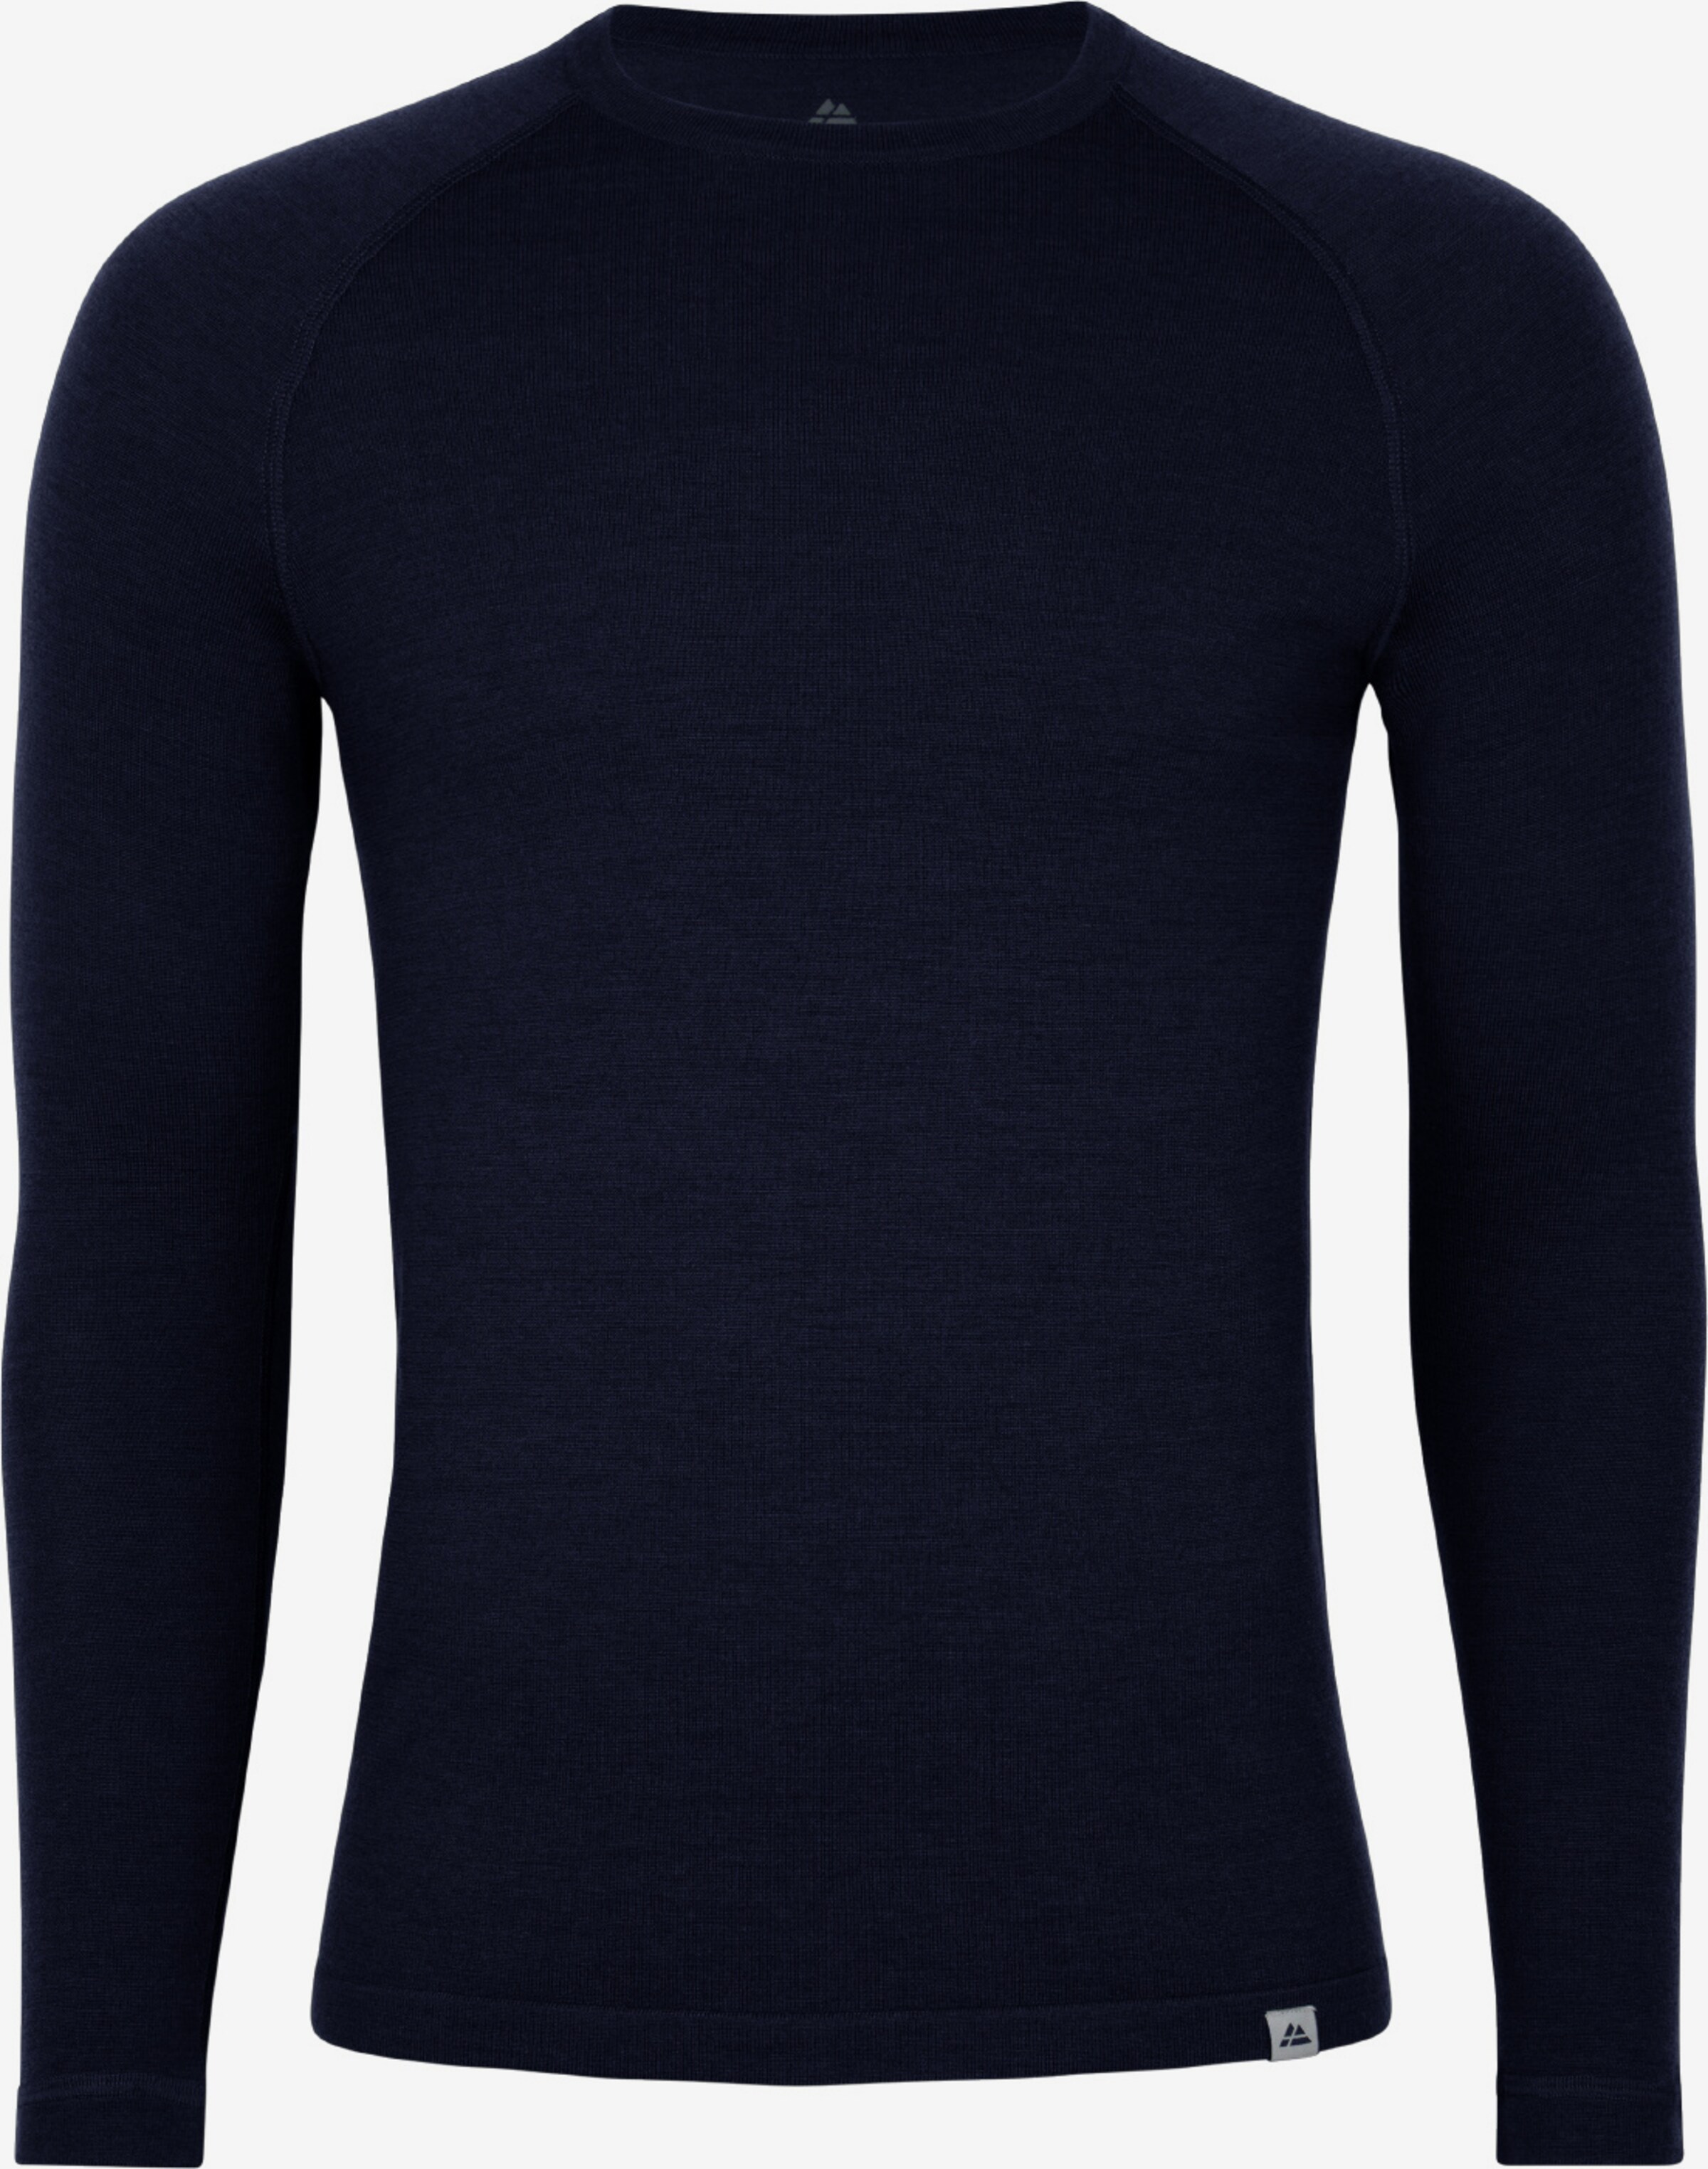 Danish Endurance | ABOUT YOU in Funktionsshirt Navy